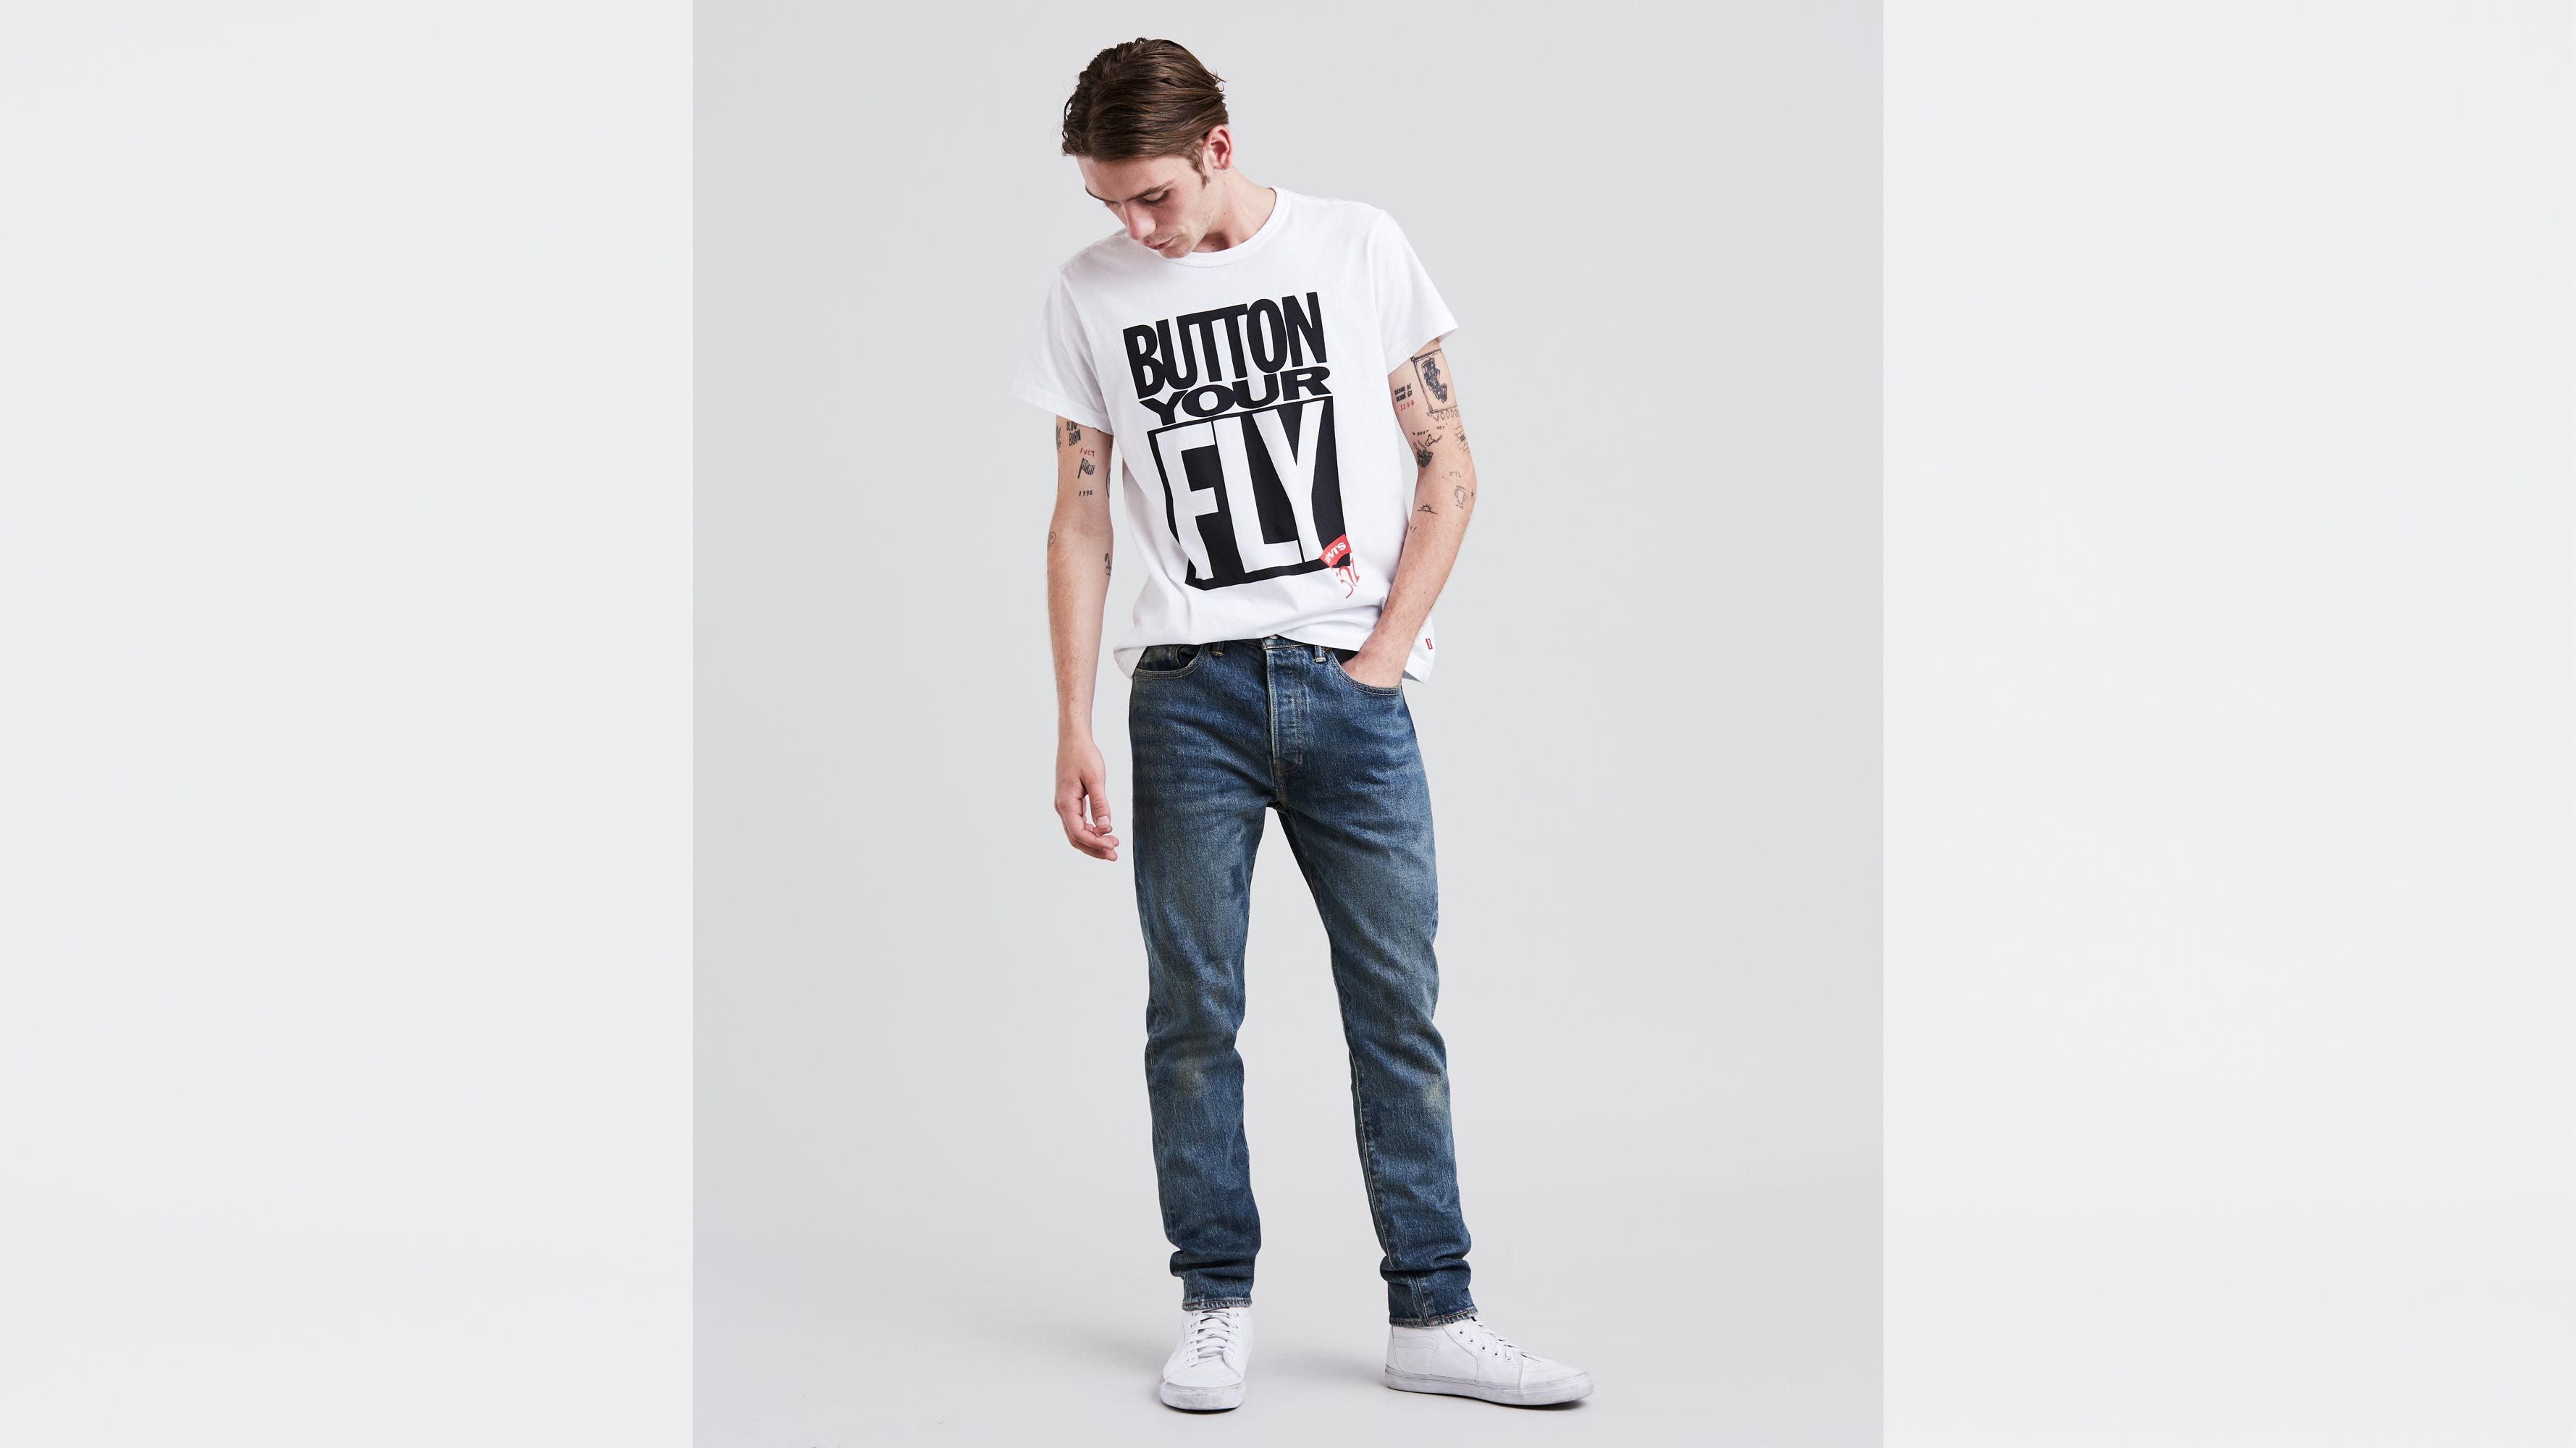 levis 501 tapered